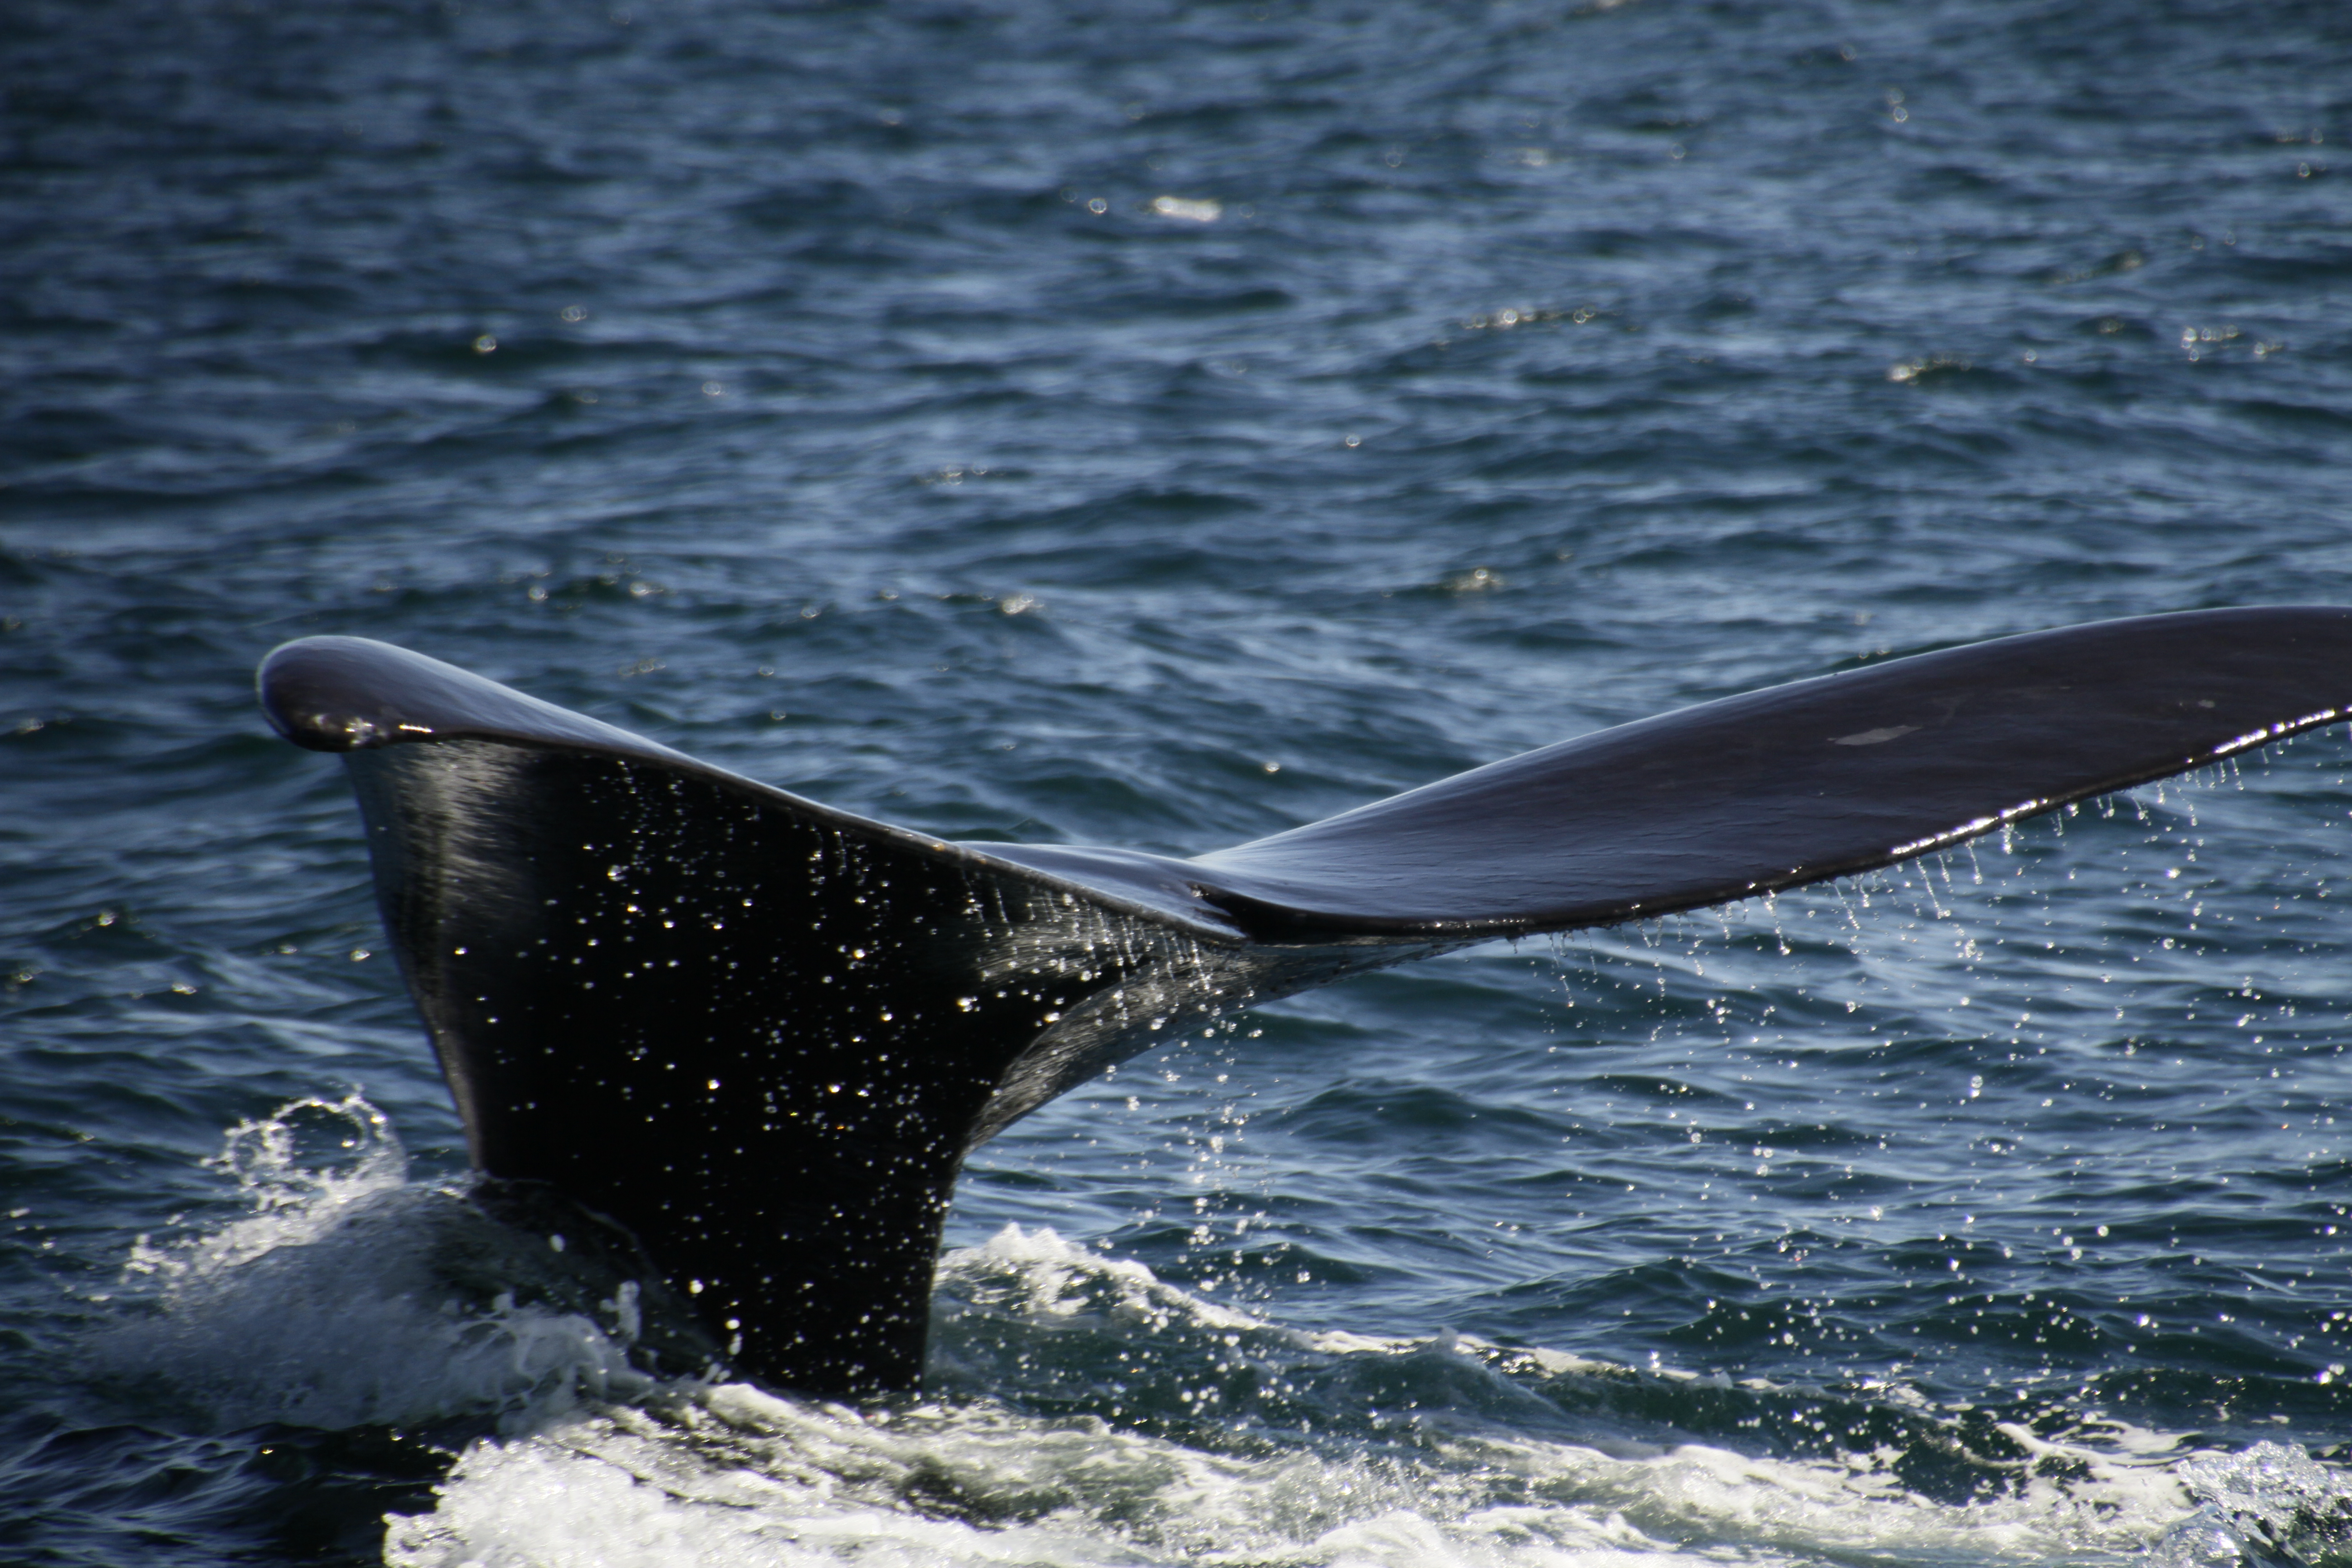 The tail of a Southern Right Whale whale as she dives.